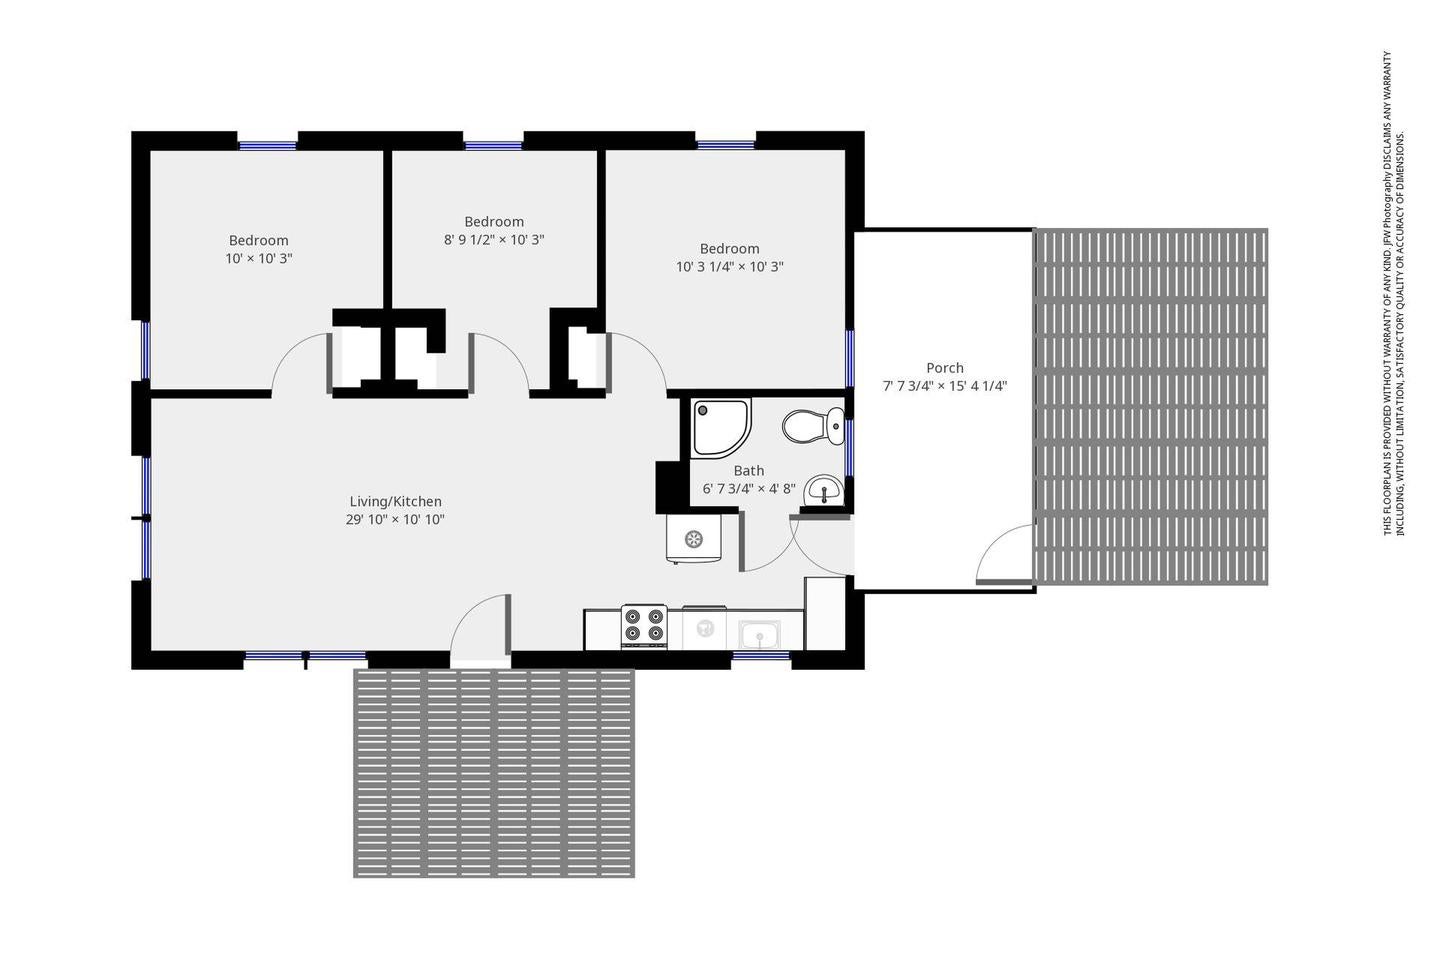 Bay View House offers a spacious floor plan for guests



Credit: NPS